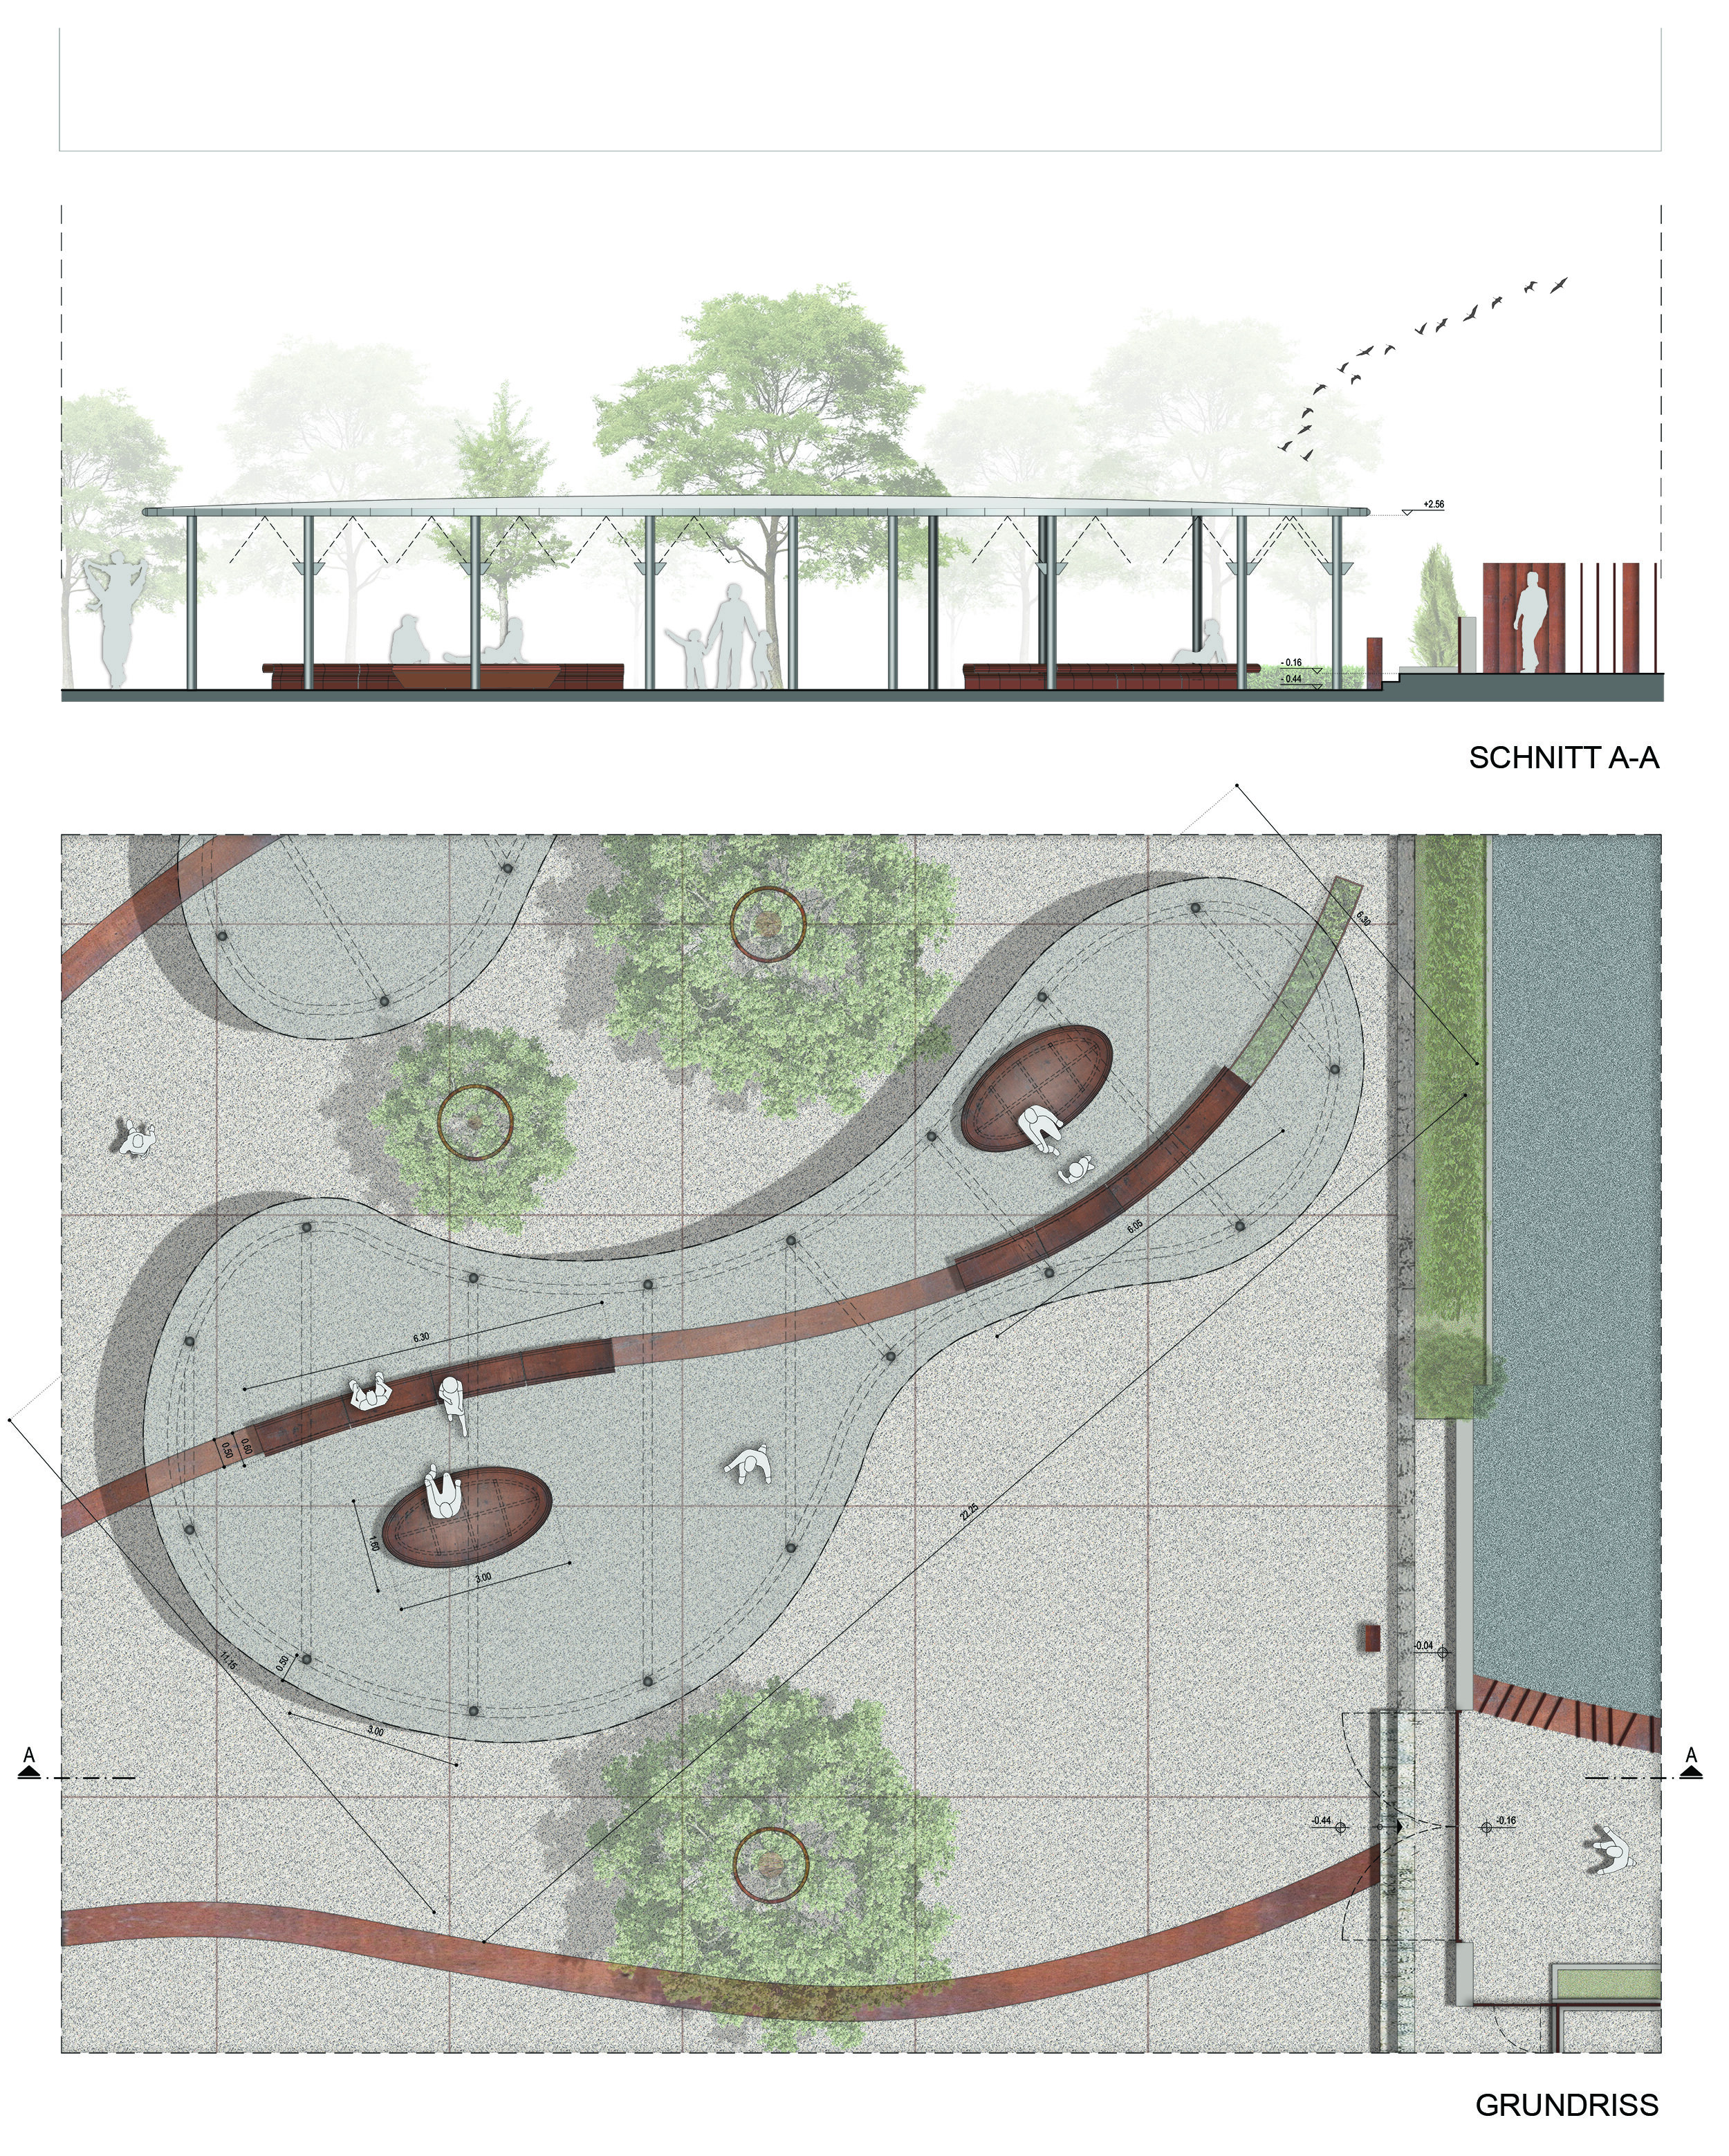 GERMAN SCHOOL OF ATHENS, REDESIGN OF THE OUTDOOR SPACE 